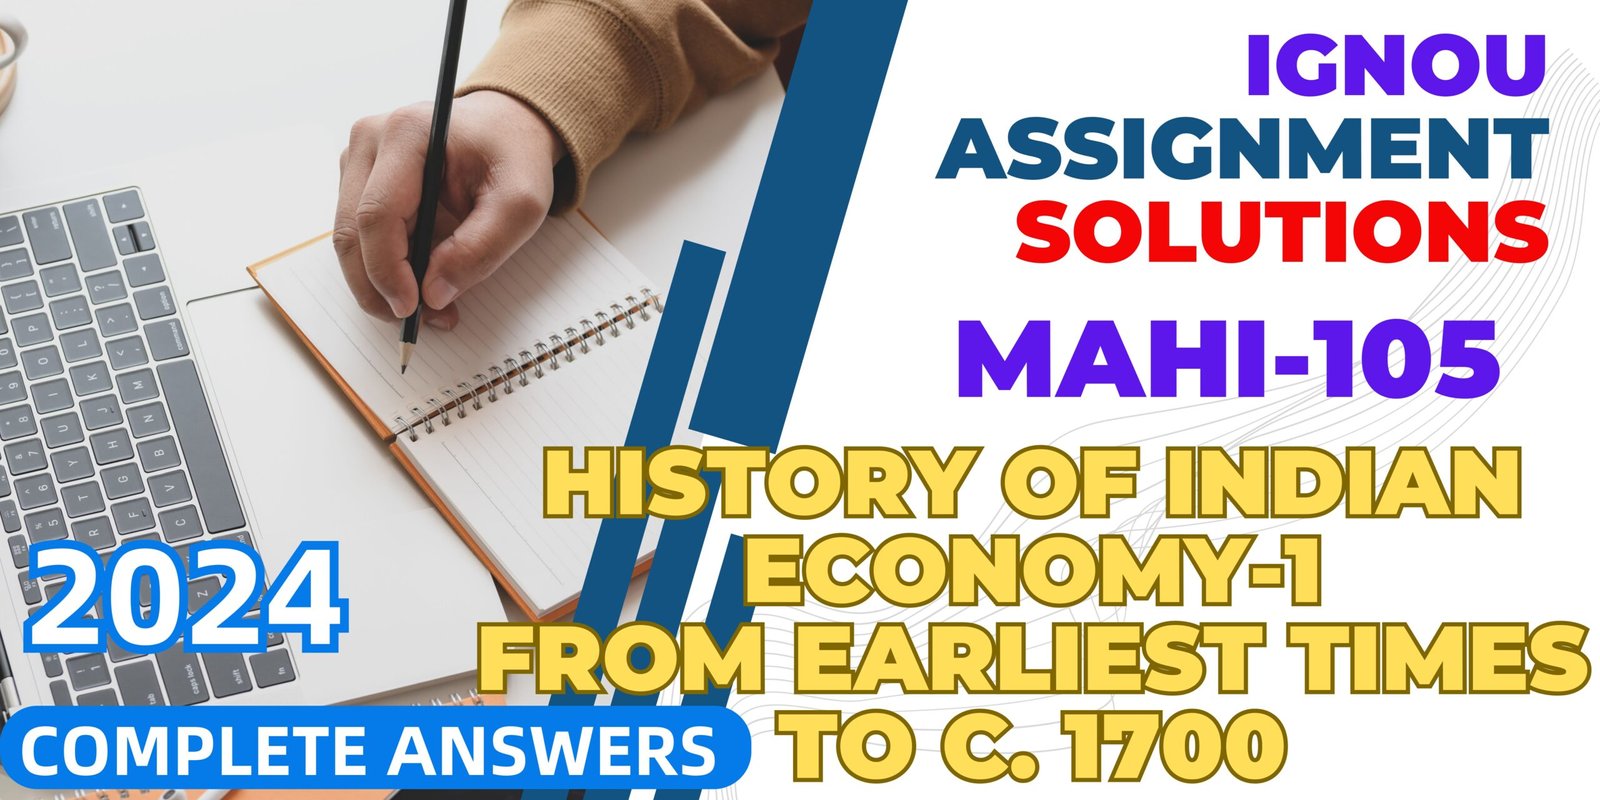 ignou history Assignment 2024